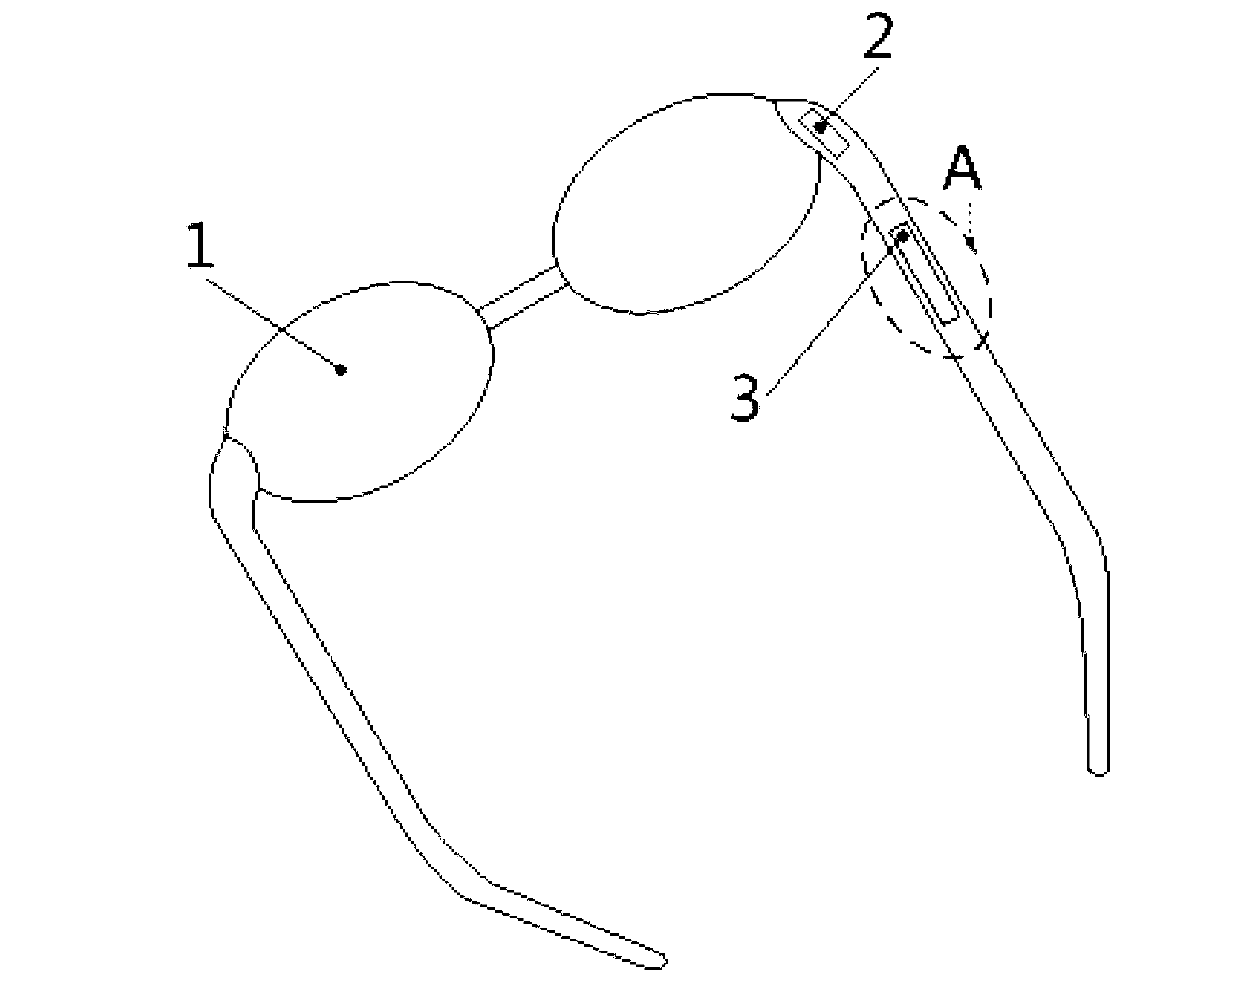 Multifunctional piezoelectric bone conduction earphone and touch force feedback system integrated with glasses